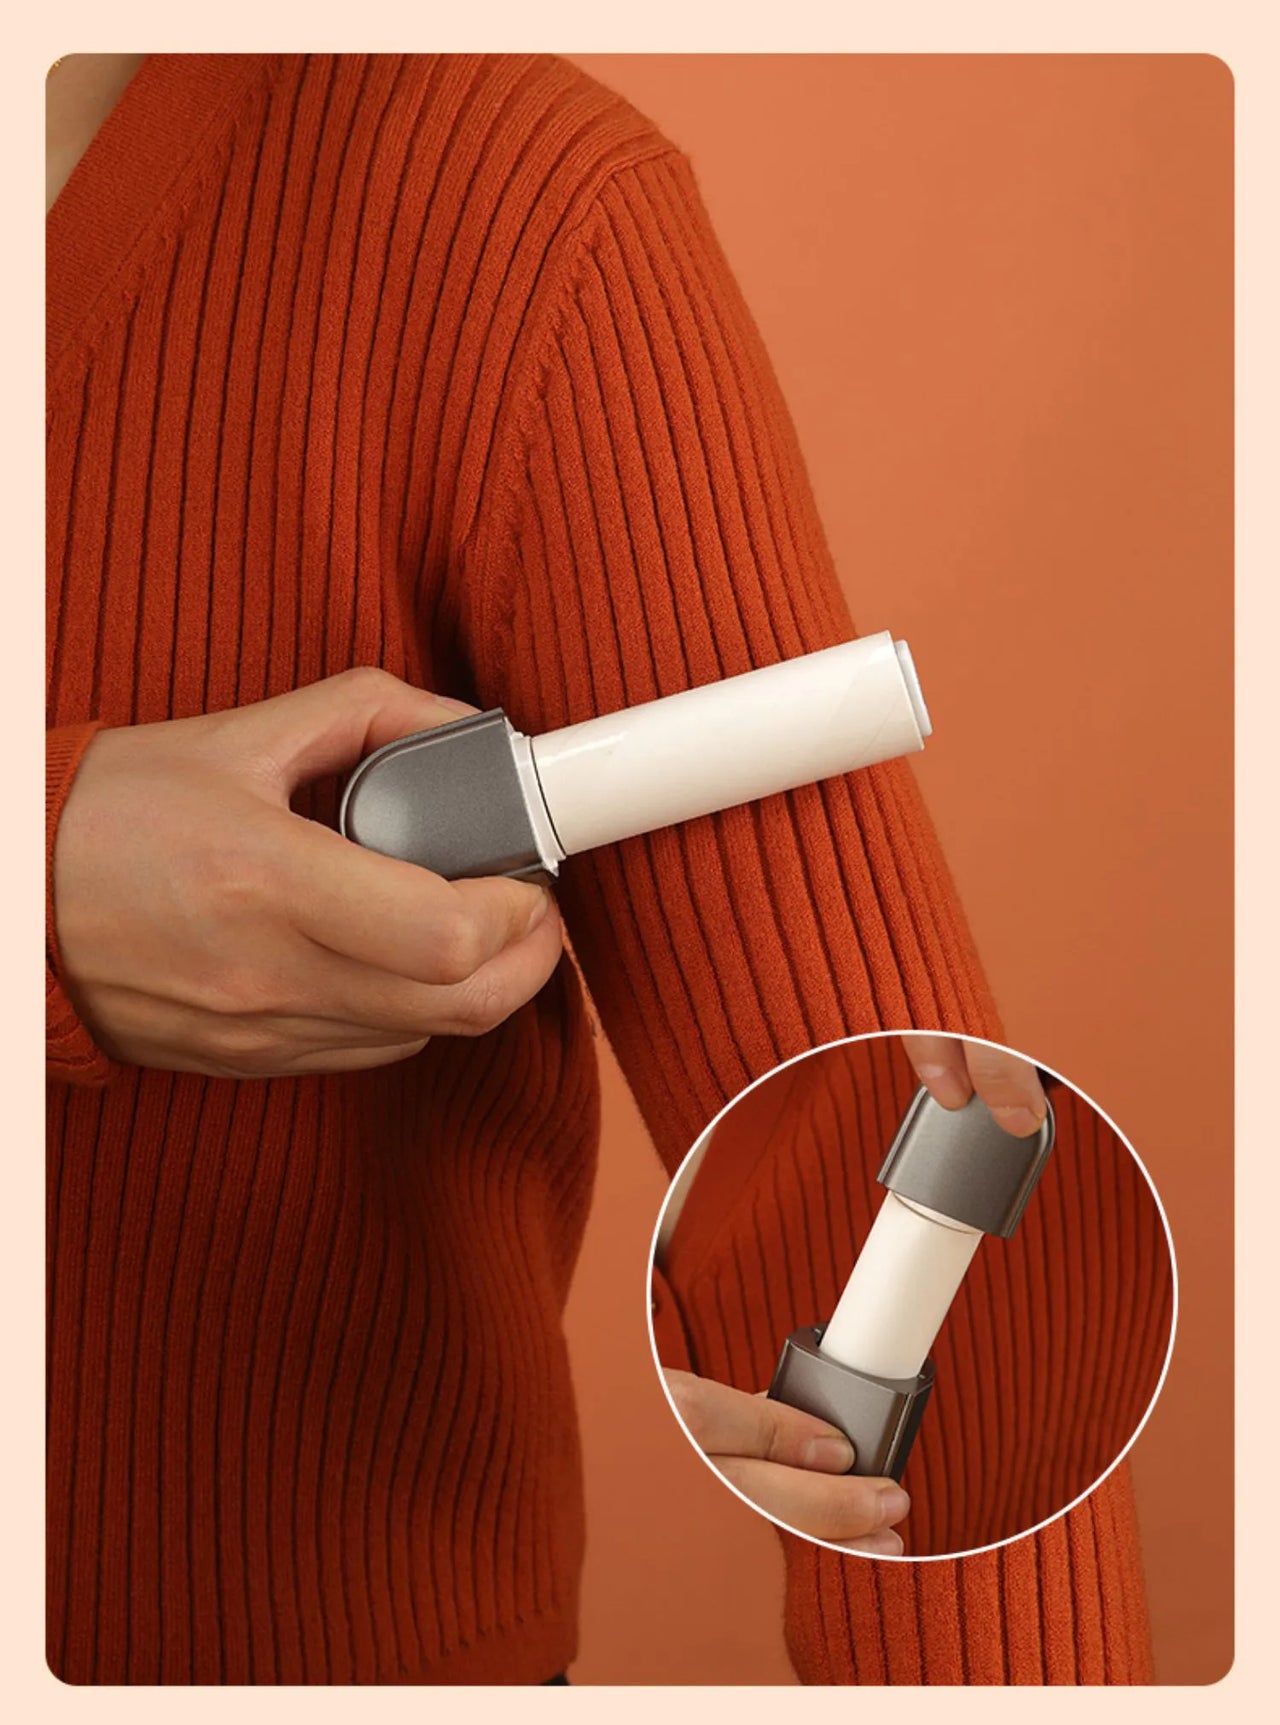 2in1 Digital Fabric Lint Remover - thedealzninja